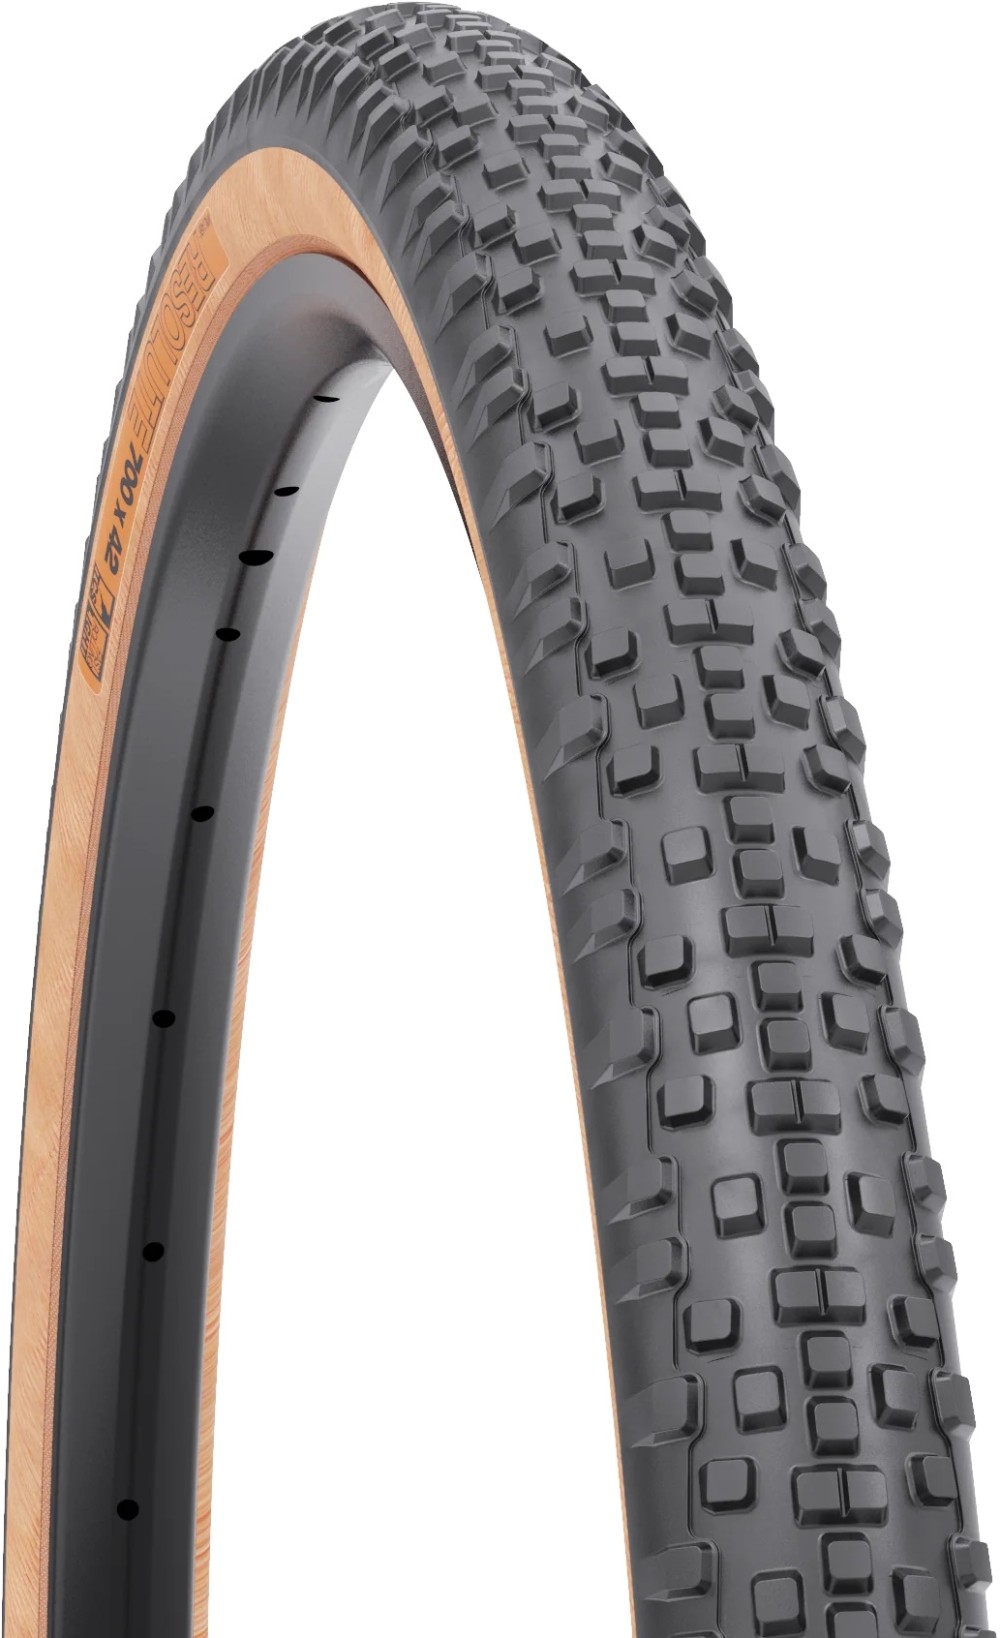 Resolute TCS Light/Fast Rolling 60tpi Dual DNA 700c Tyre image 0